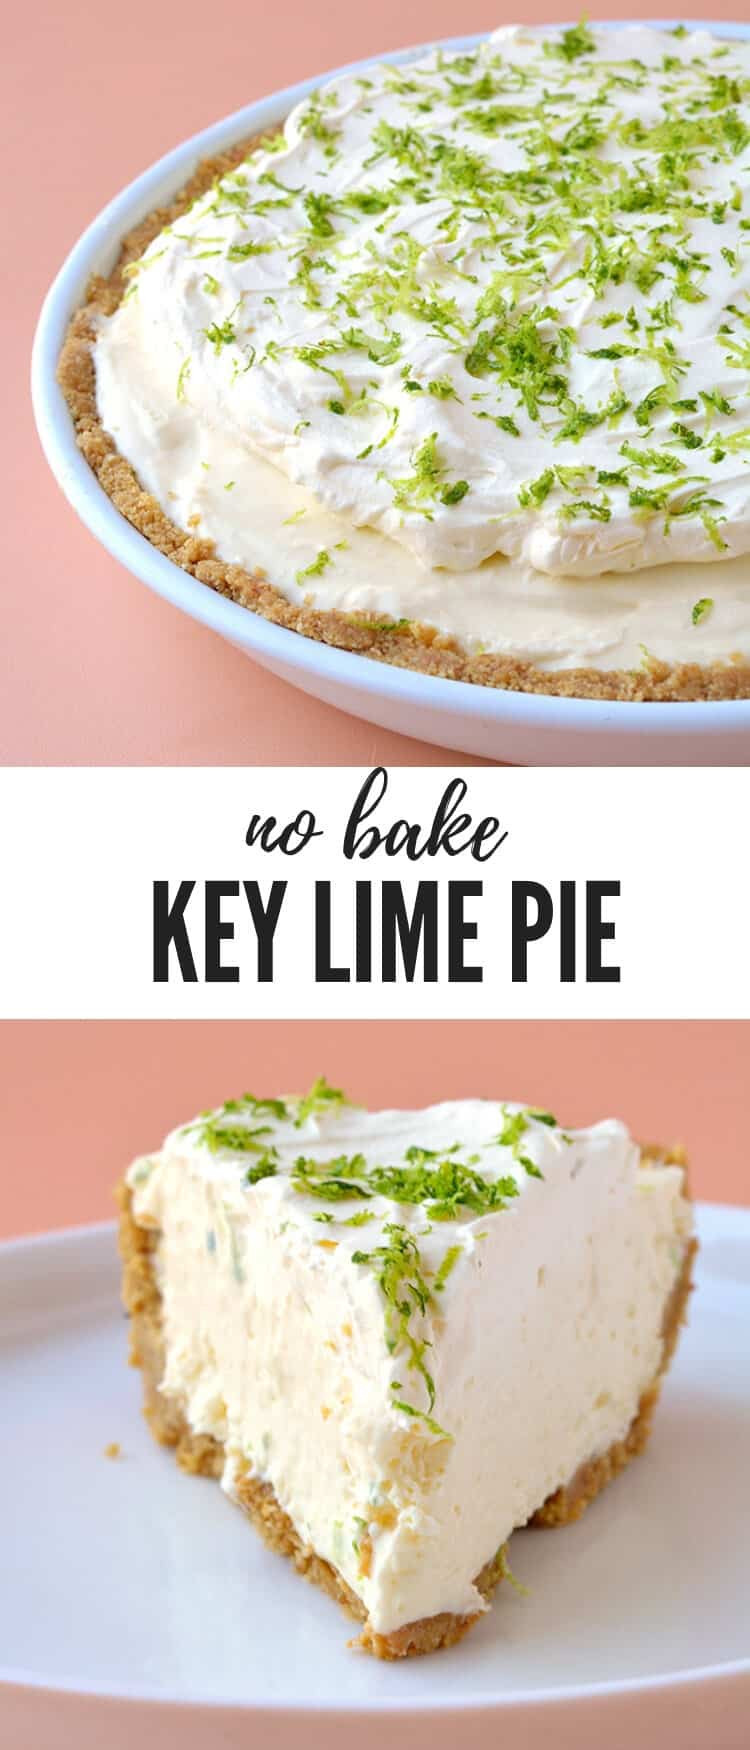 Key Lime Pie With Cream Cheese
 The Best Ideas for No Bake Key Lime Pie with Cream Cheese